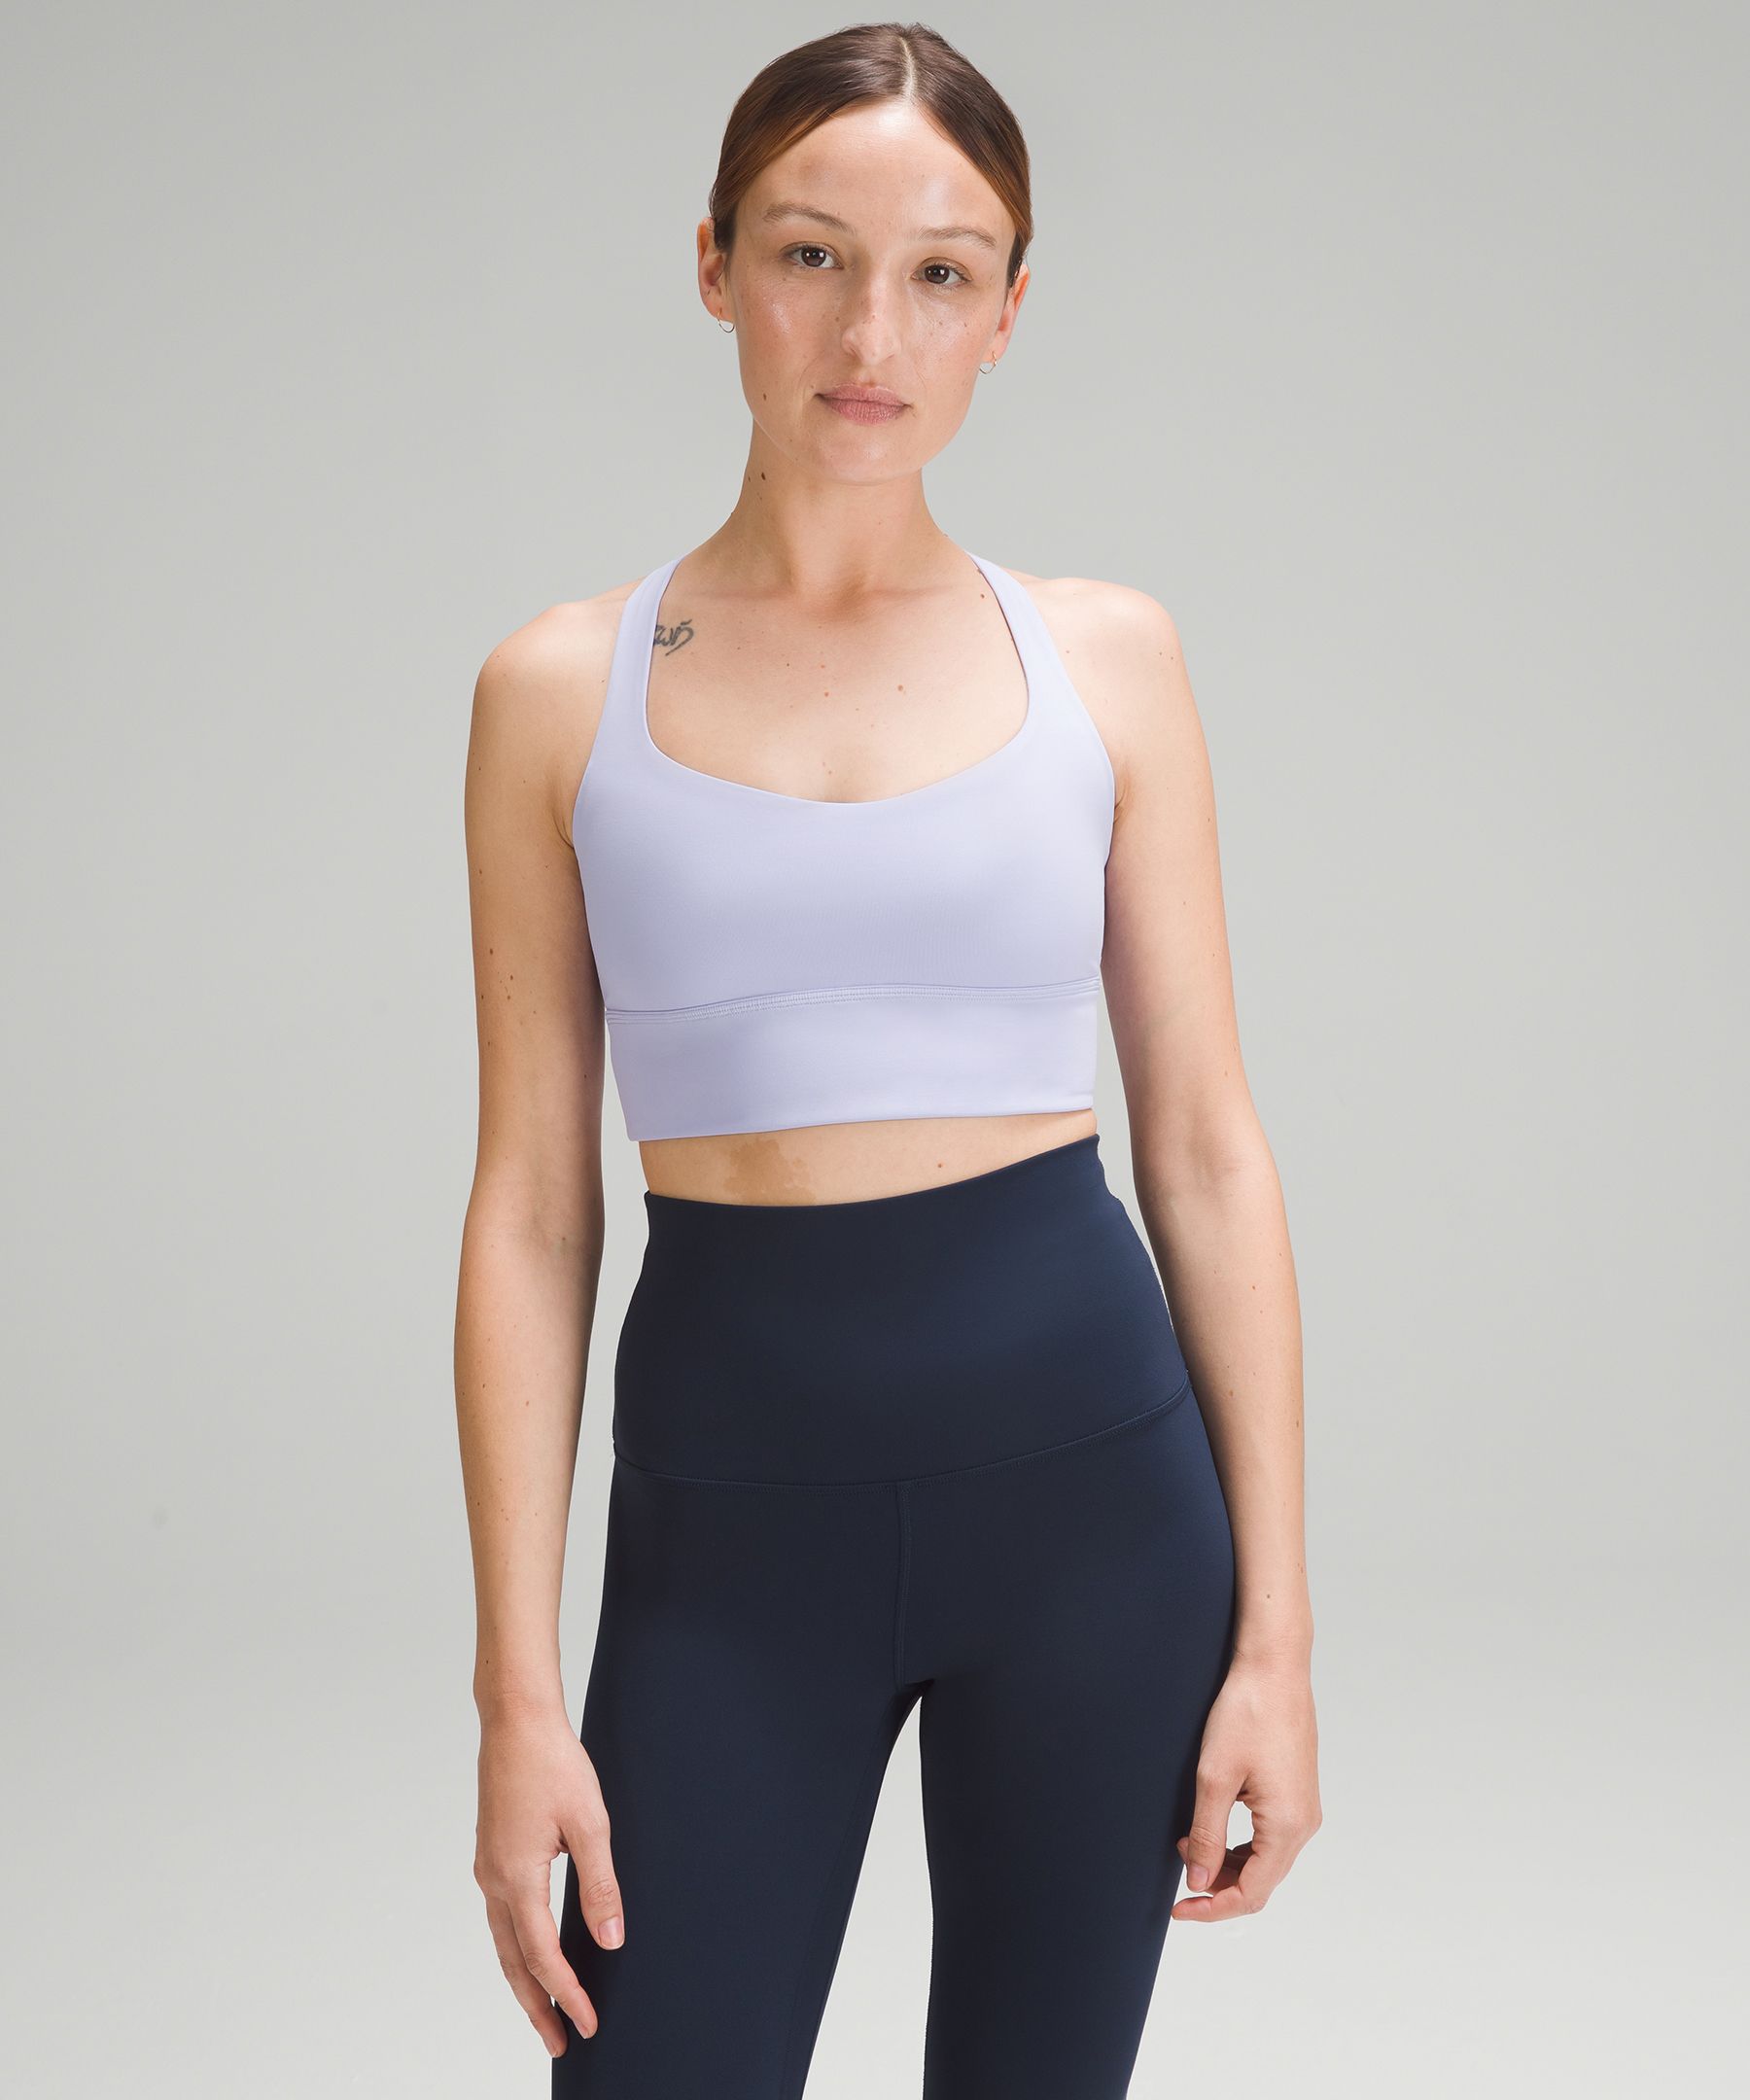 Lululemon Free to Be Longline Bra - Wild *Light Support, A/B Cup Online Only. 1